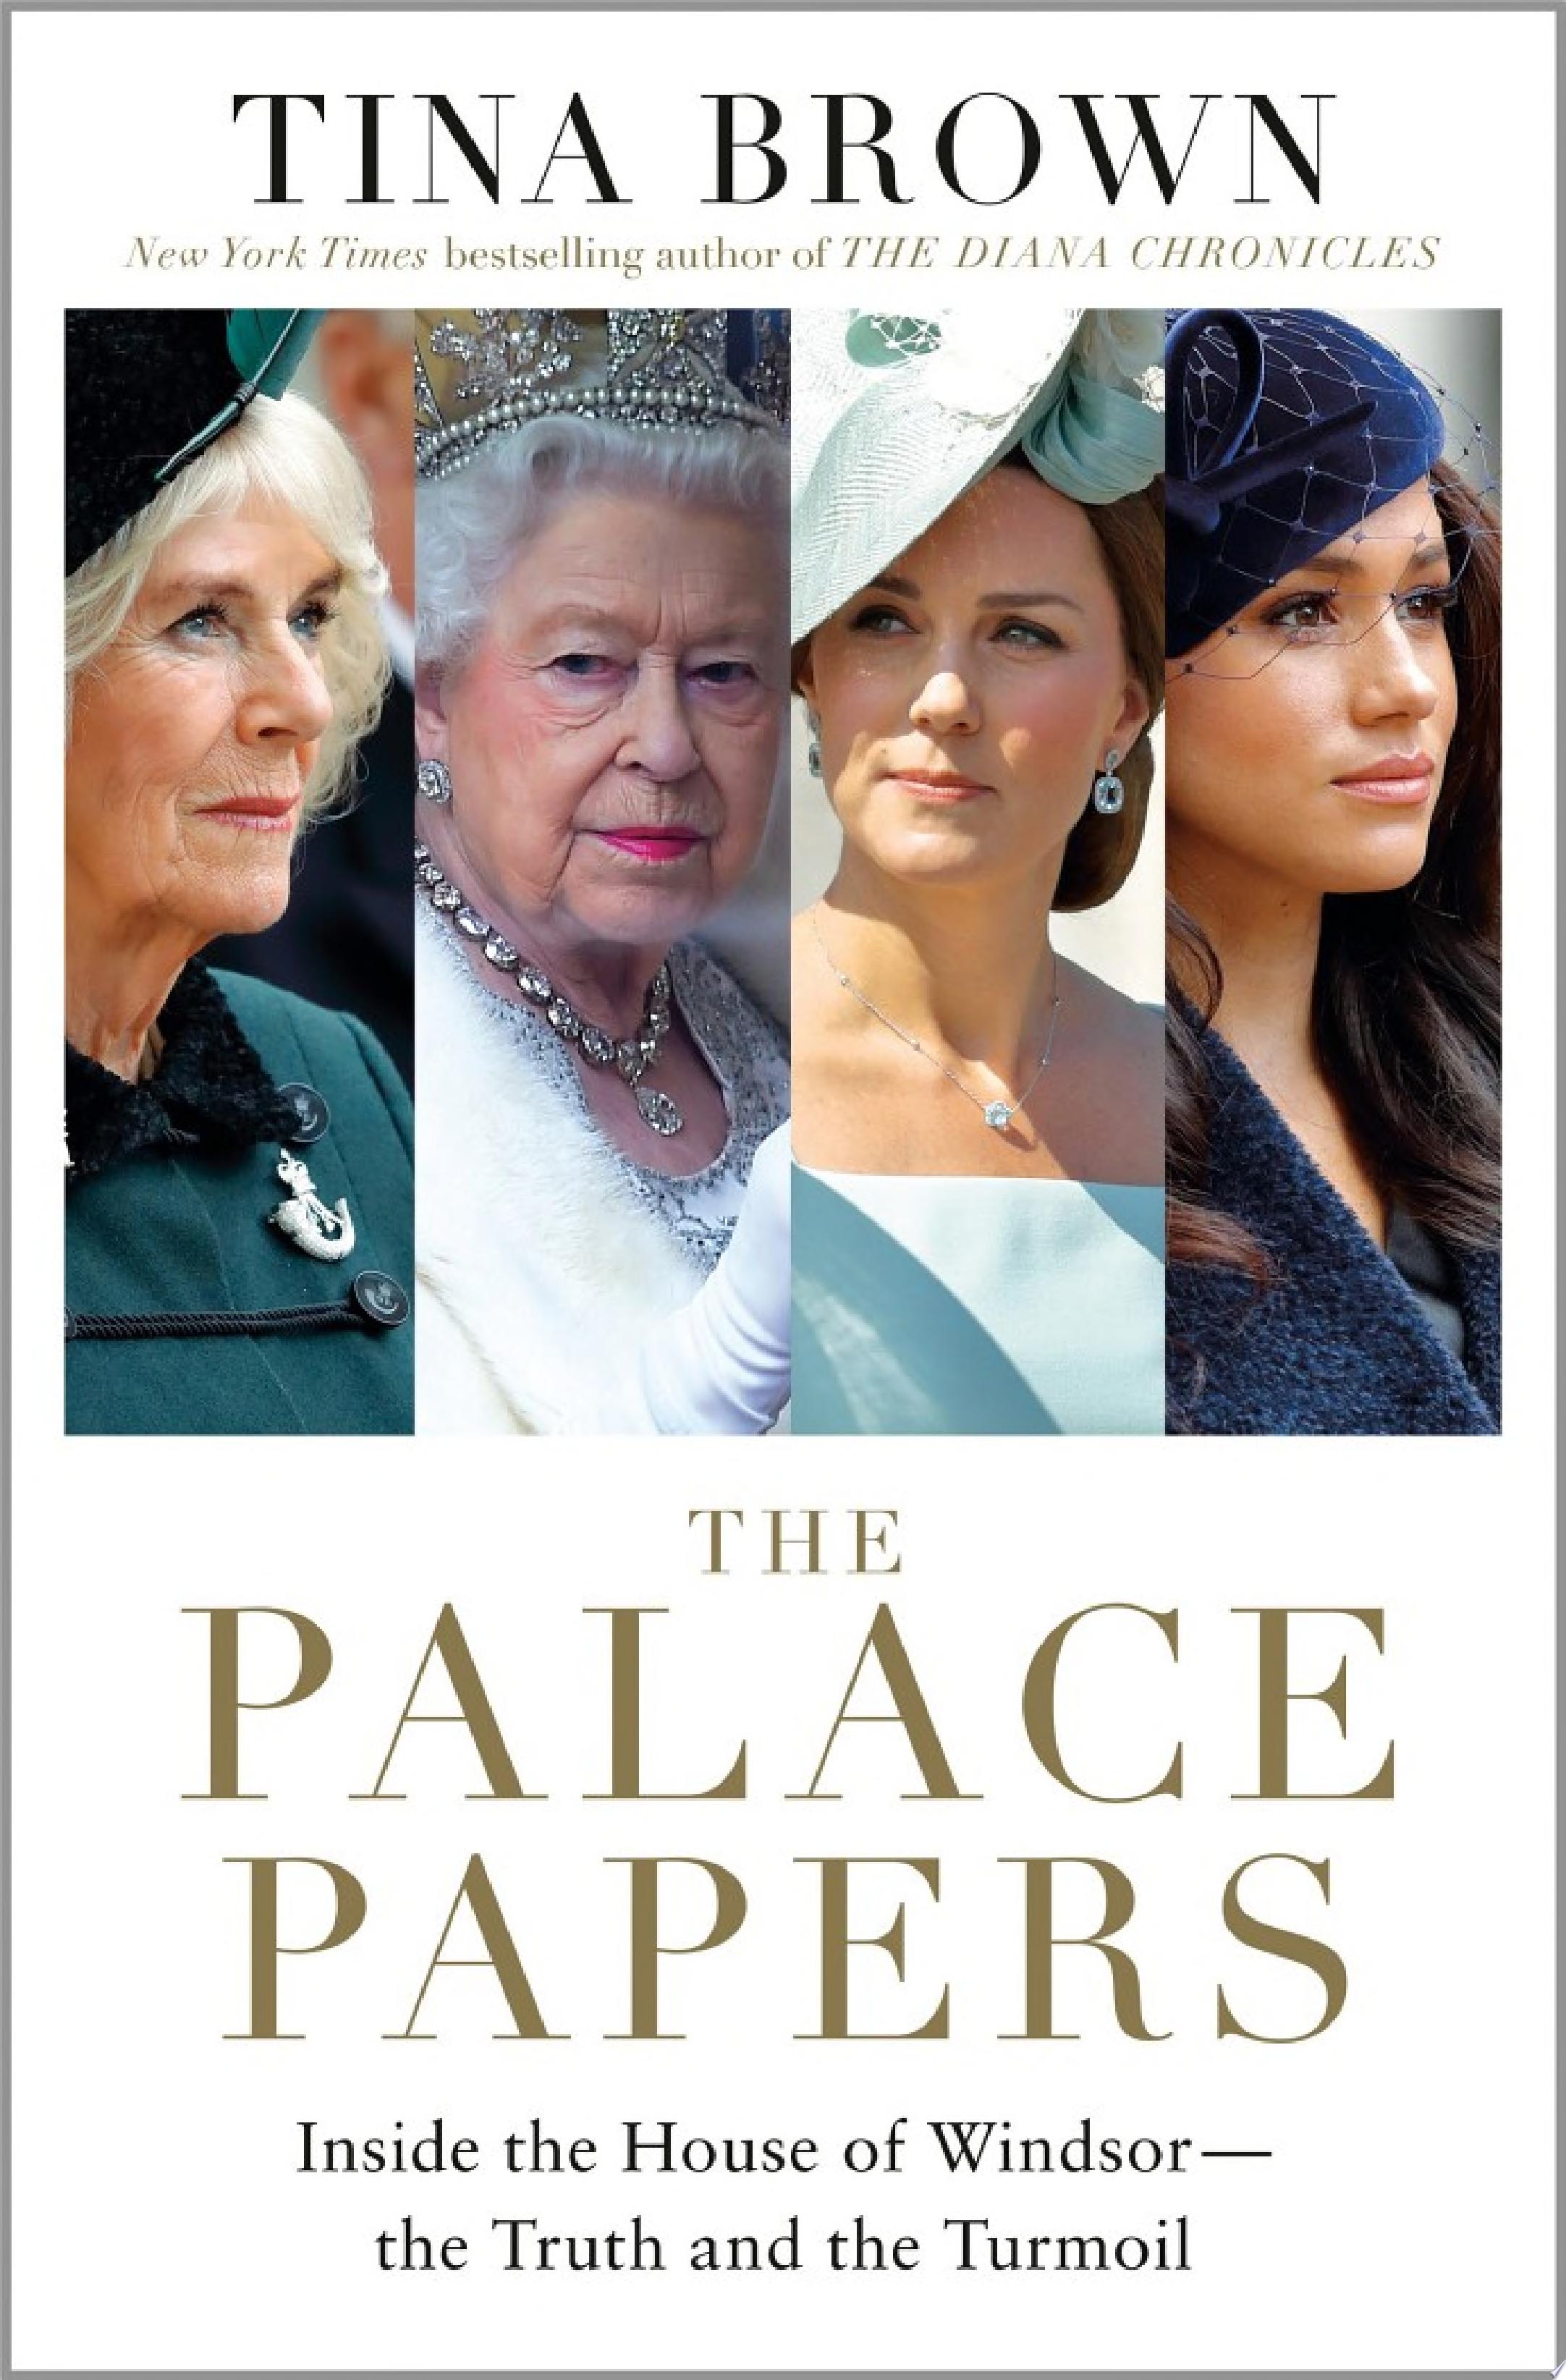 Image for "The Palace Papers"